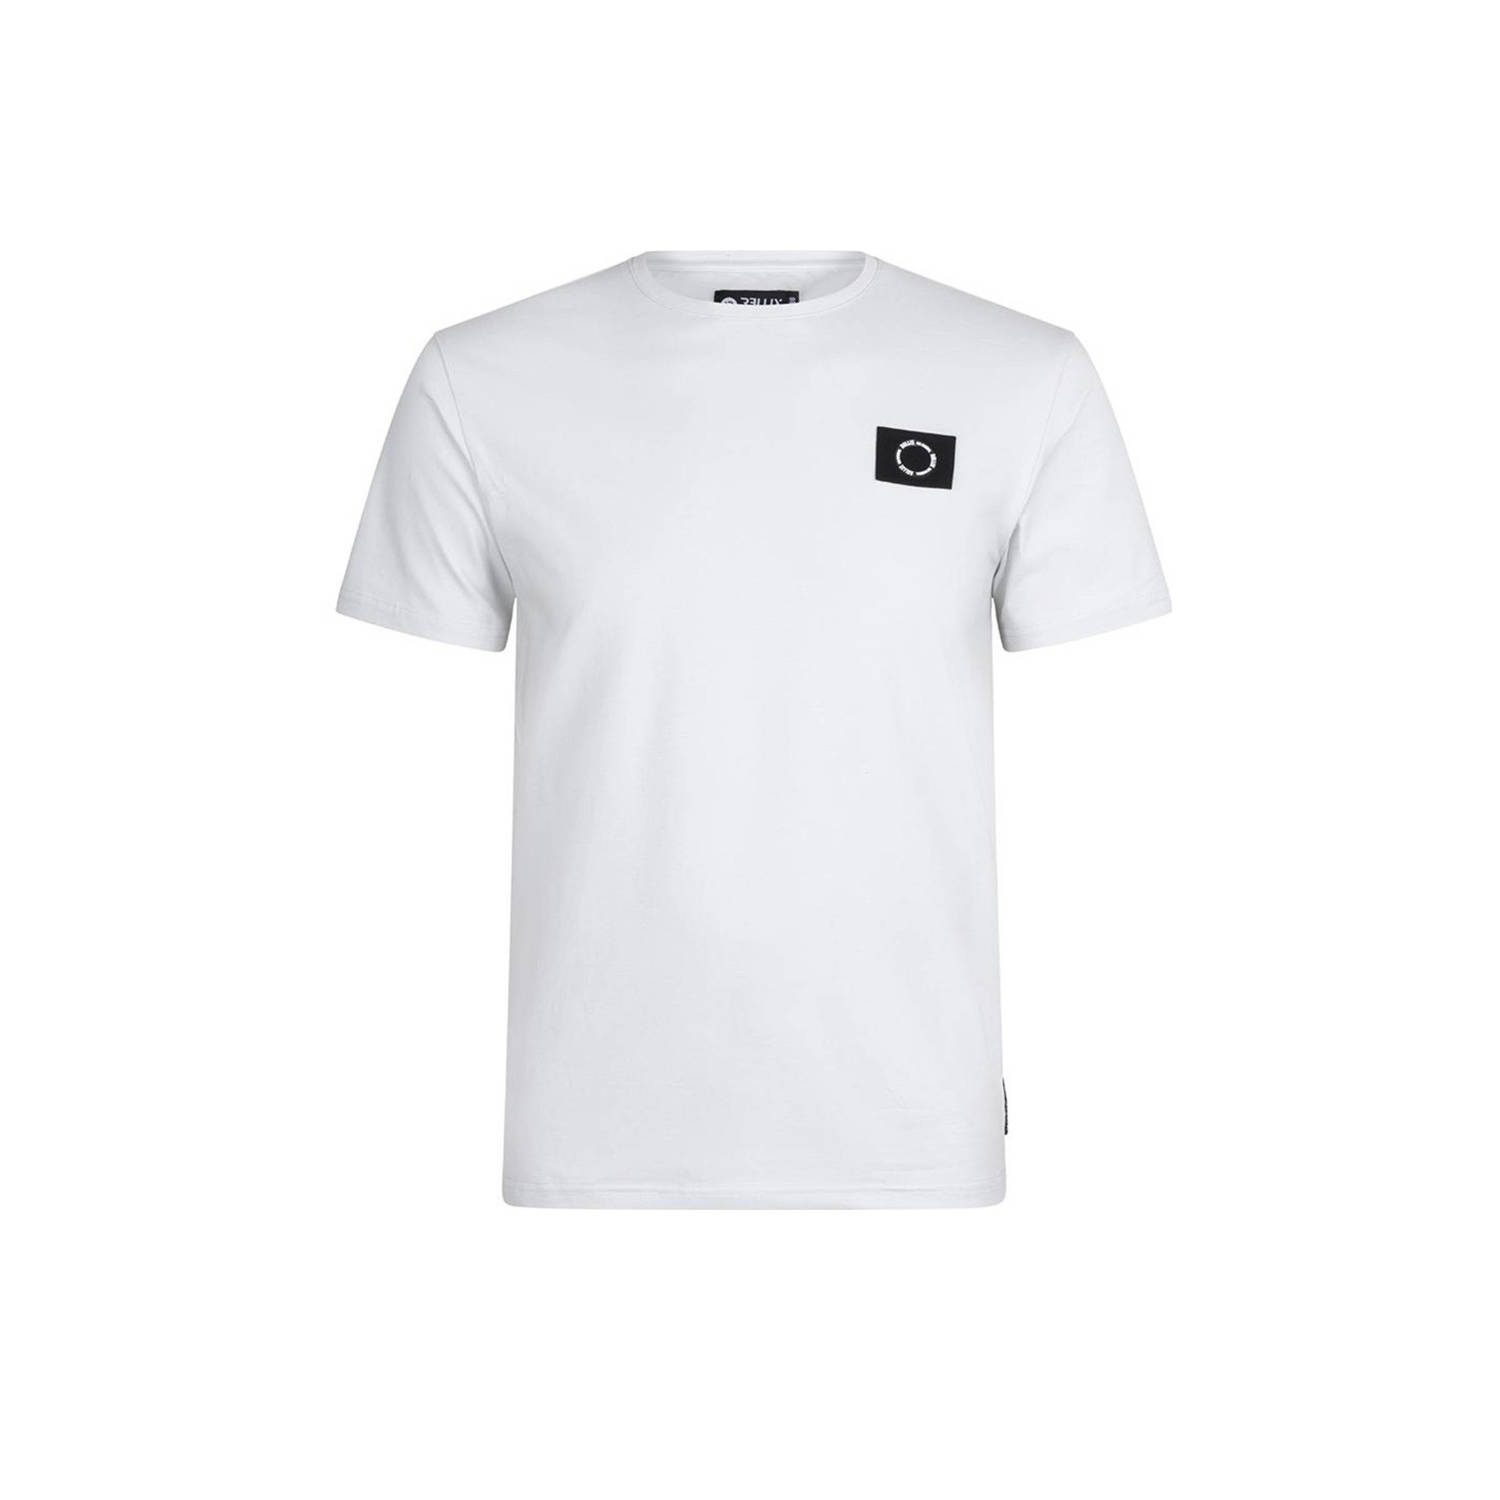 Rellix T-shirt offwhite